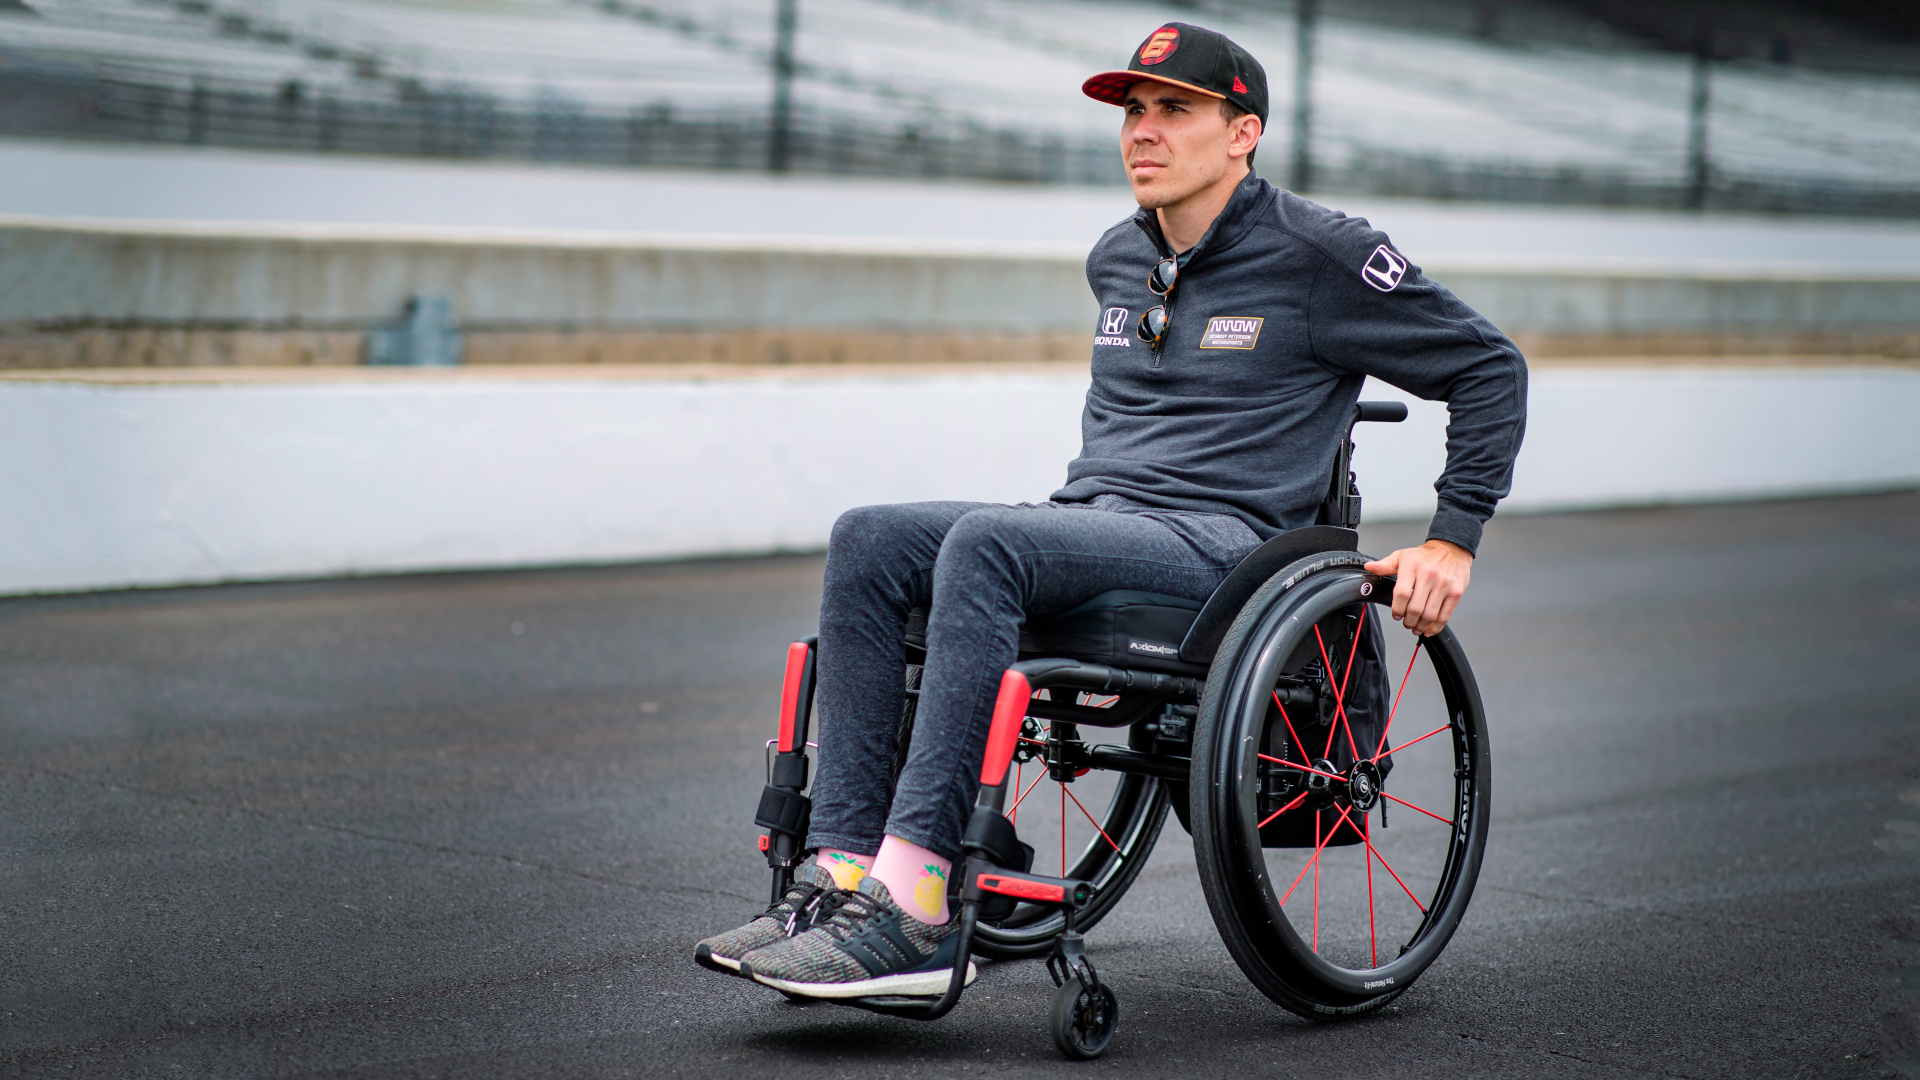 Wickens Wants to be the First Disabled Driver to Run the Indy 500